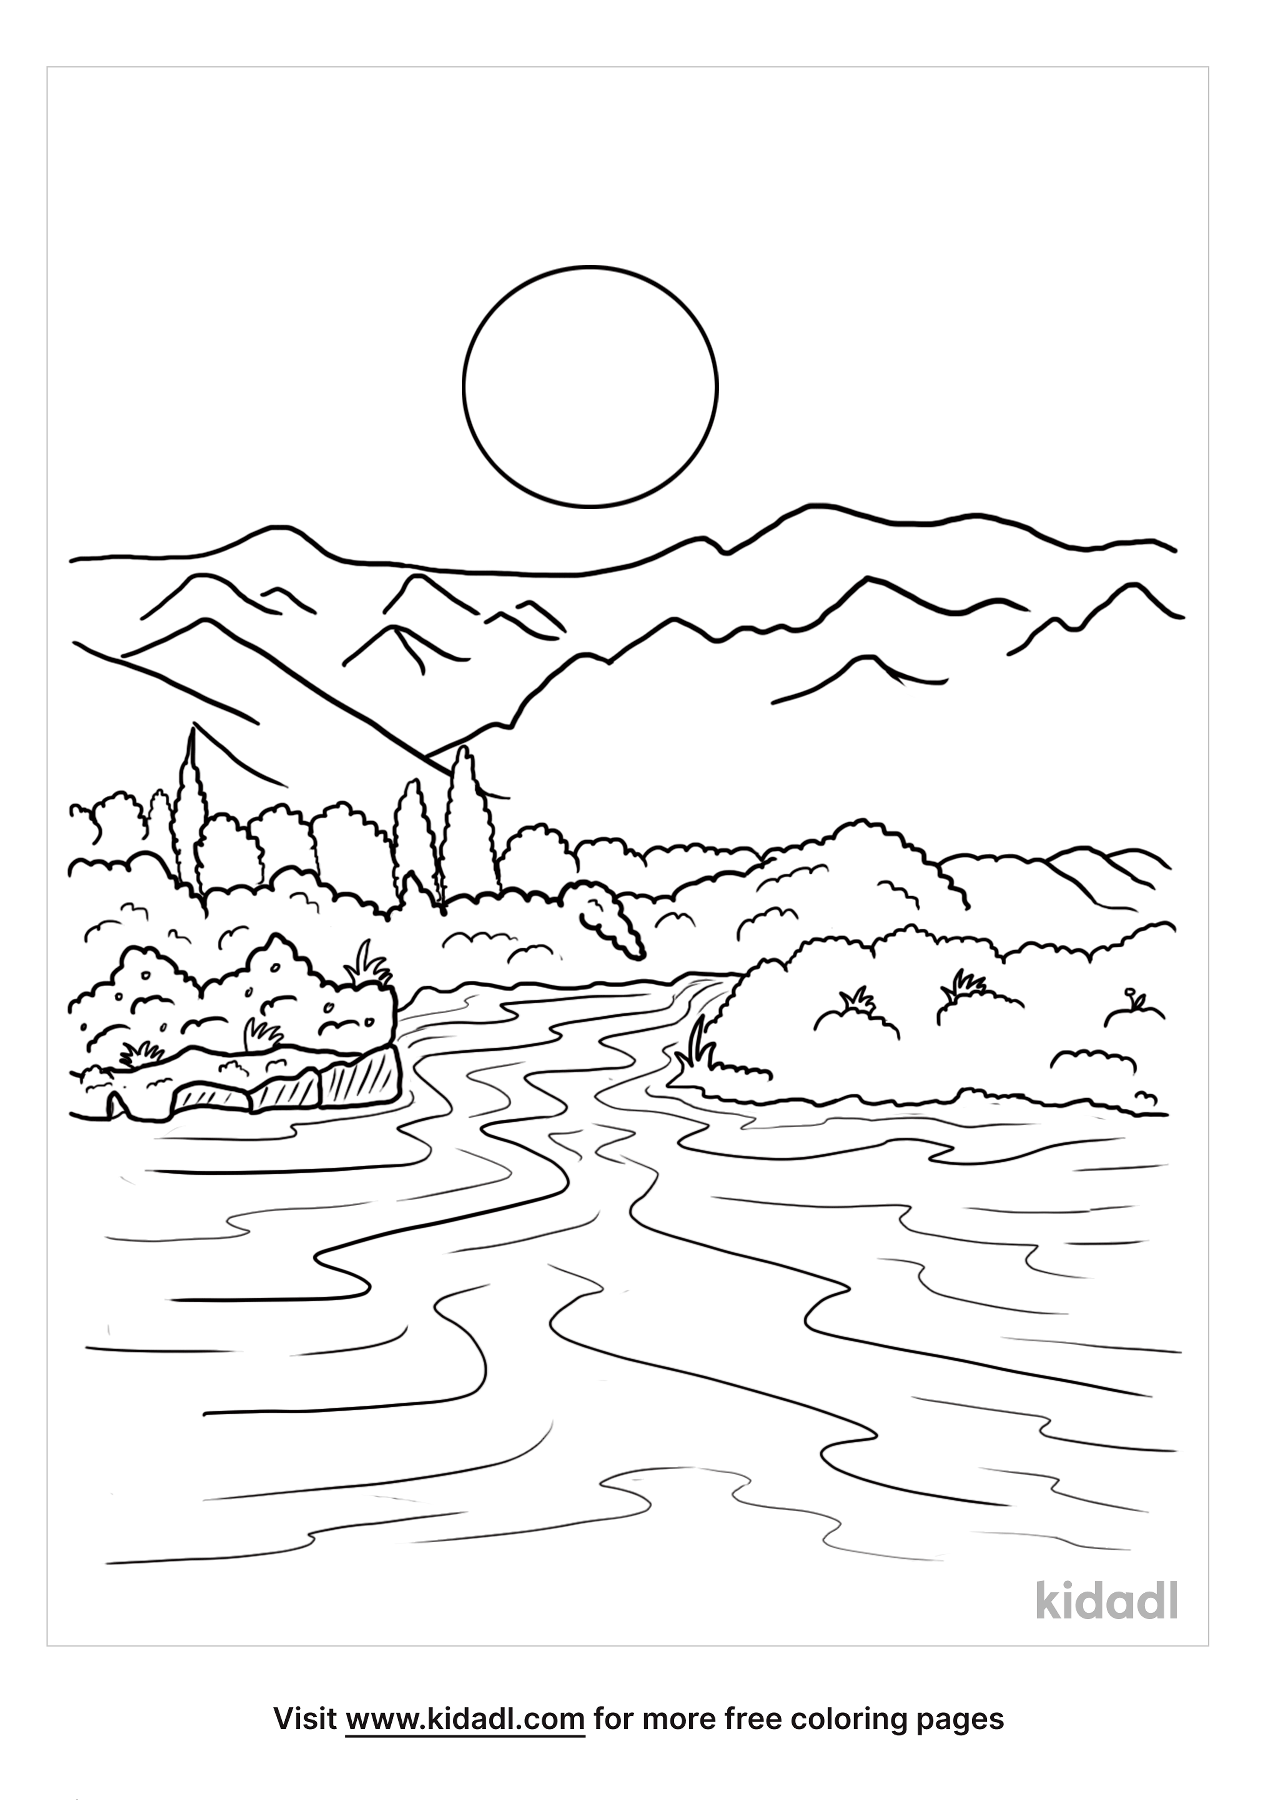 Nile River Coloring Pages | Free World, Geography & Flags Coloring Pages |  Kidadl